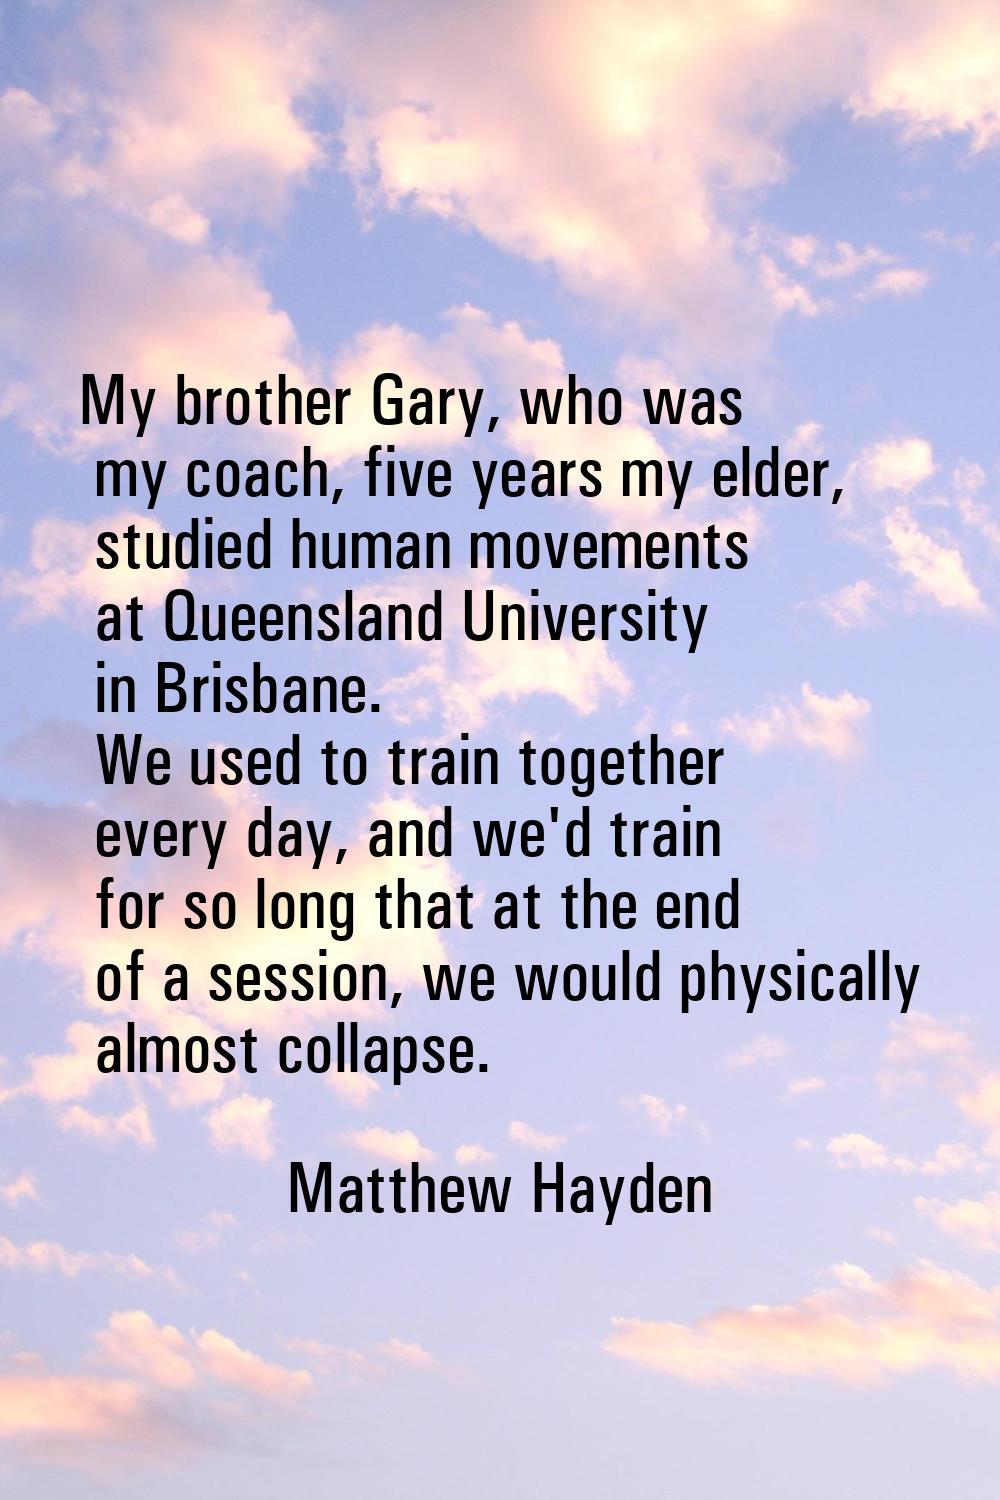 My brother Gary, who was my coach, five years my elder, studied human movements at Queensland Unive